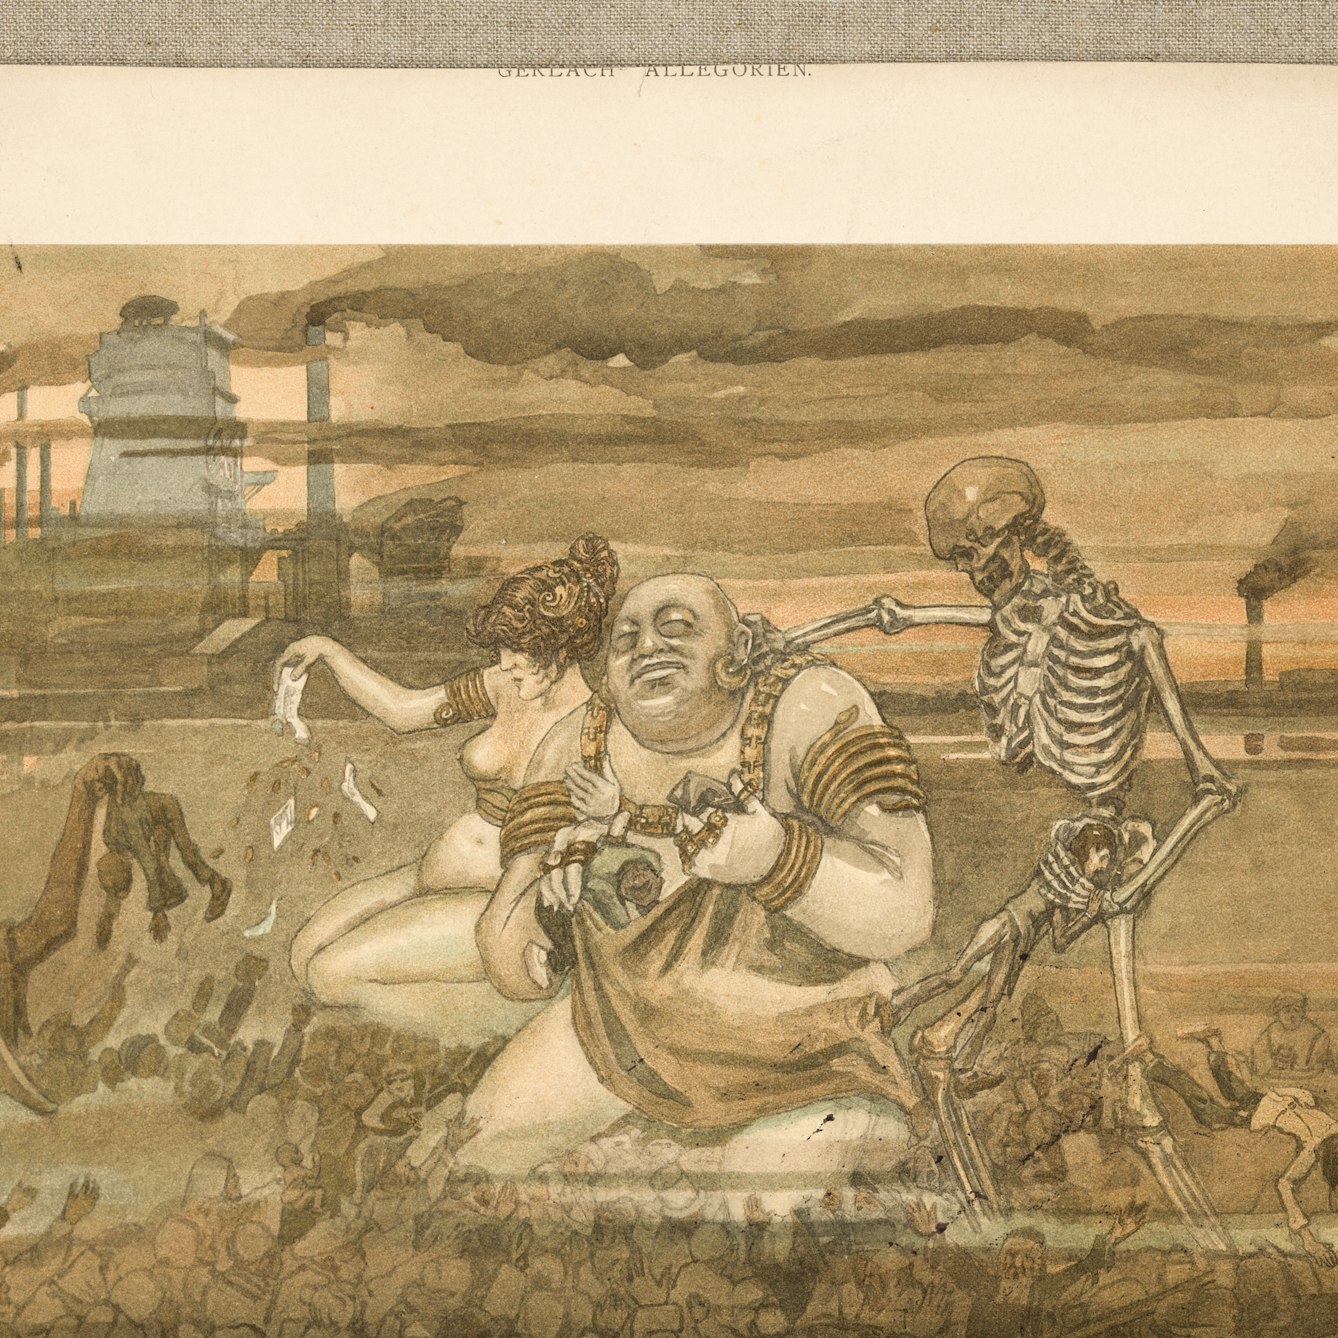 Photograph of a watercolour painting against a textile background, depicting a semi naked man and woman kneeling in dirt next to a skeleton. Factory chimneys billowing smoke are in the background.